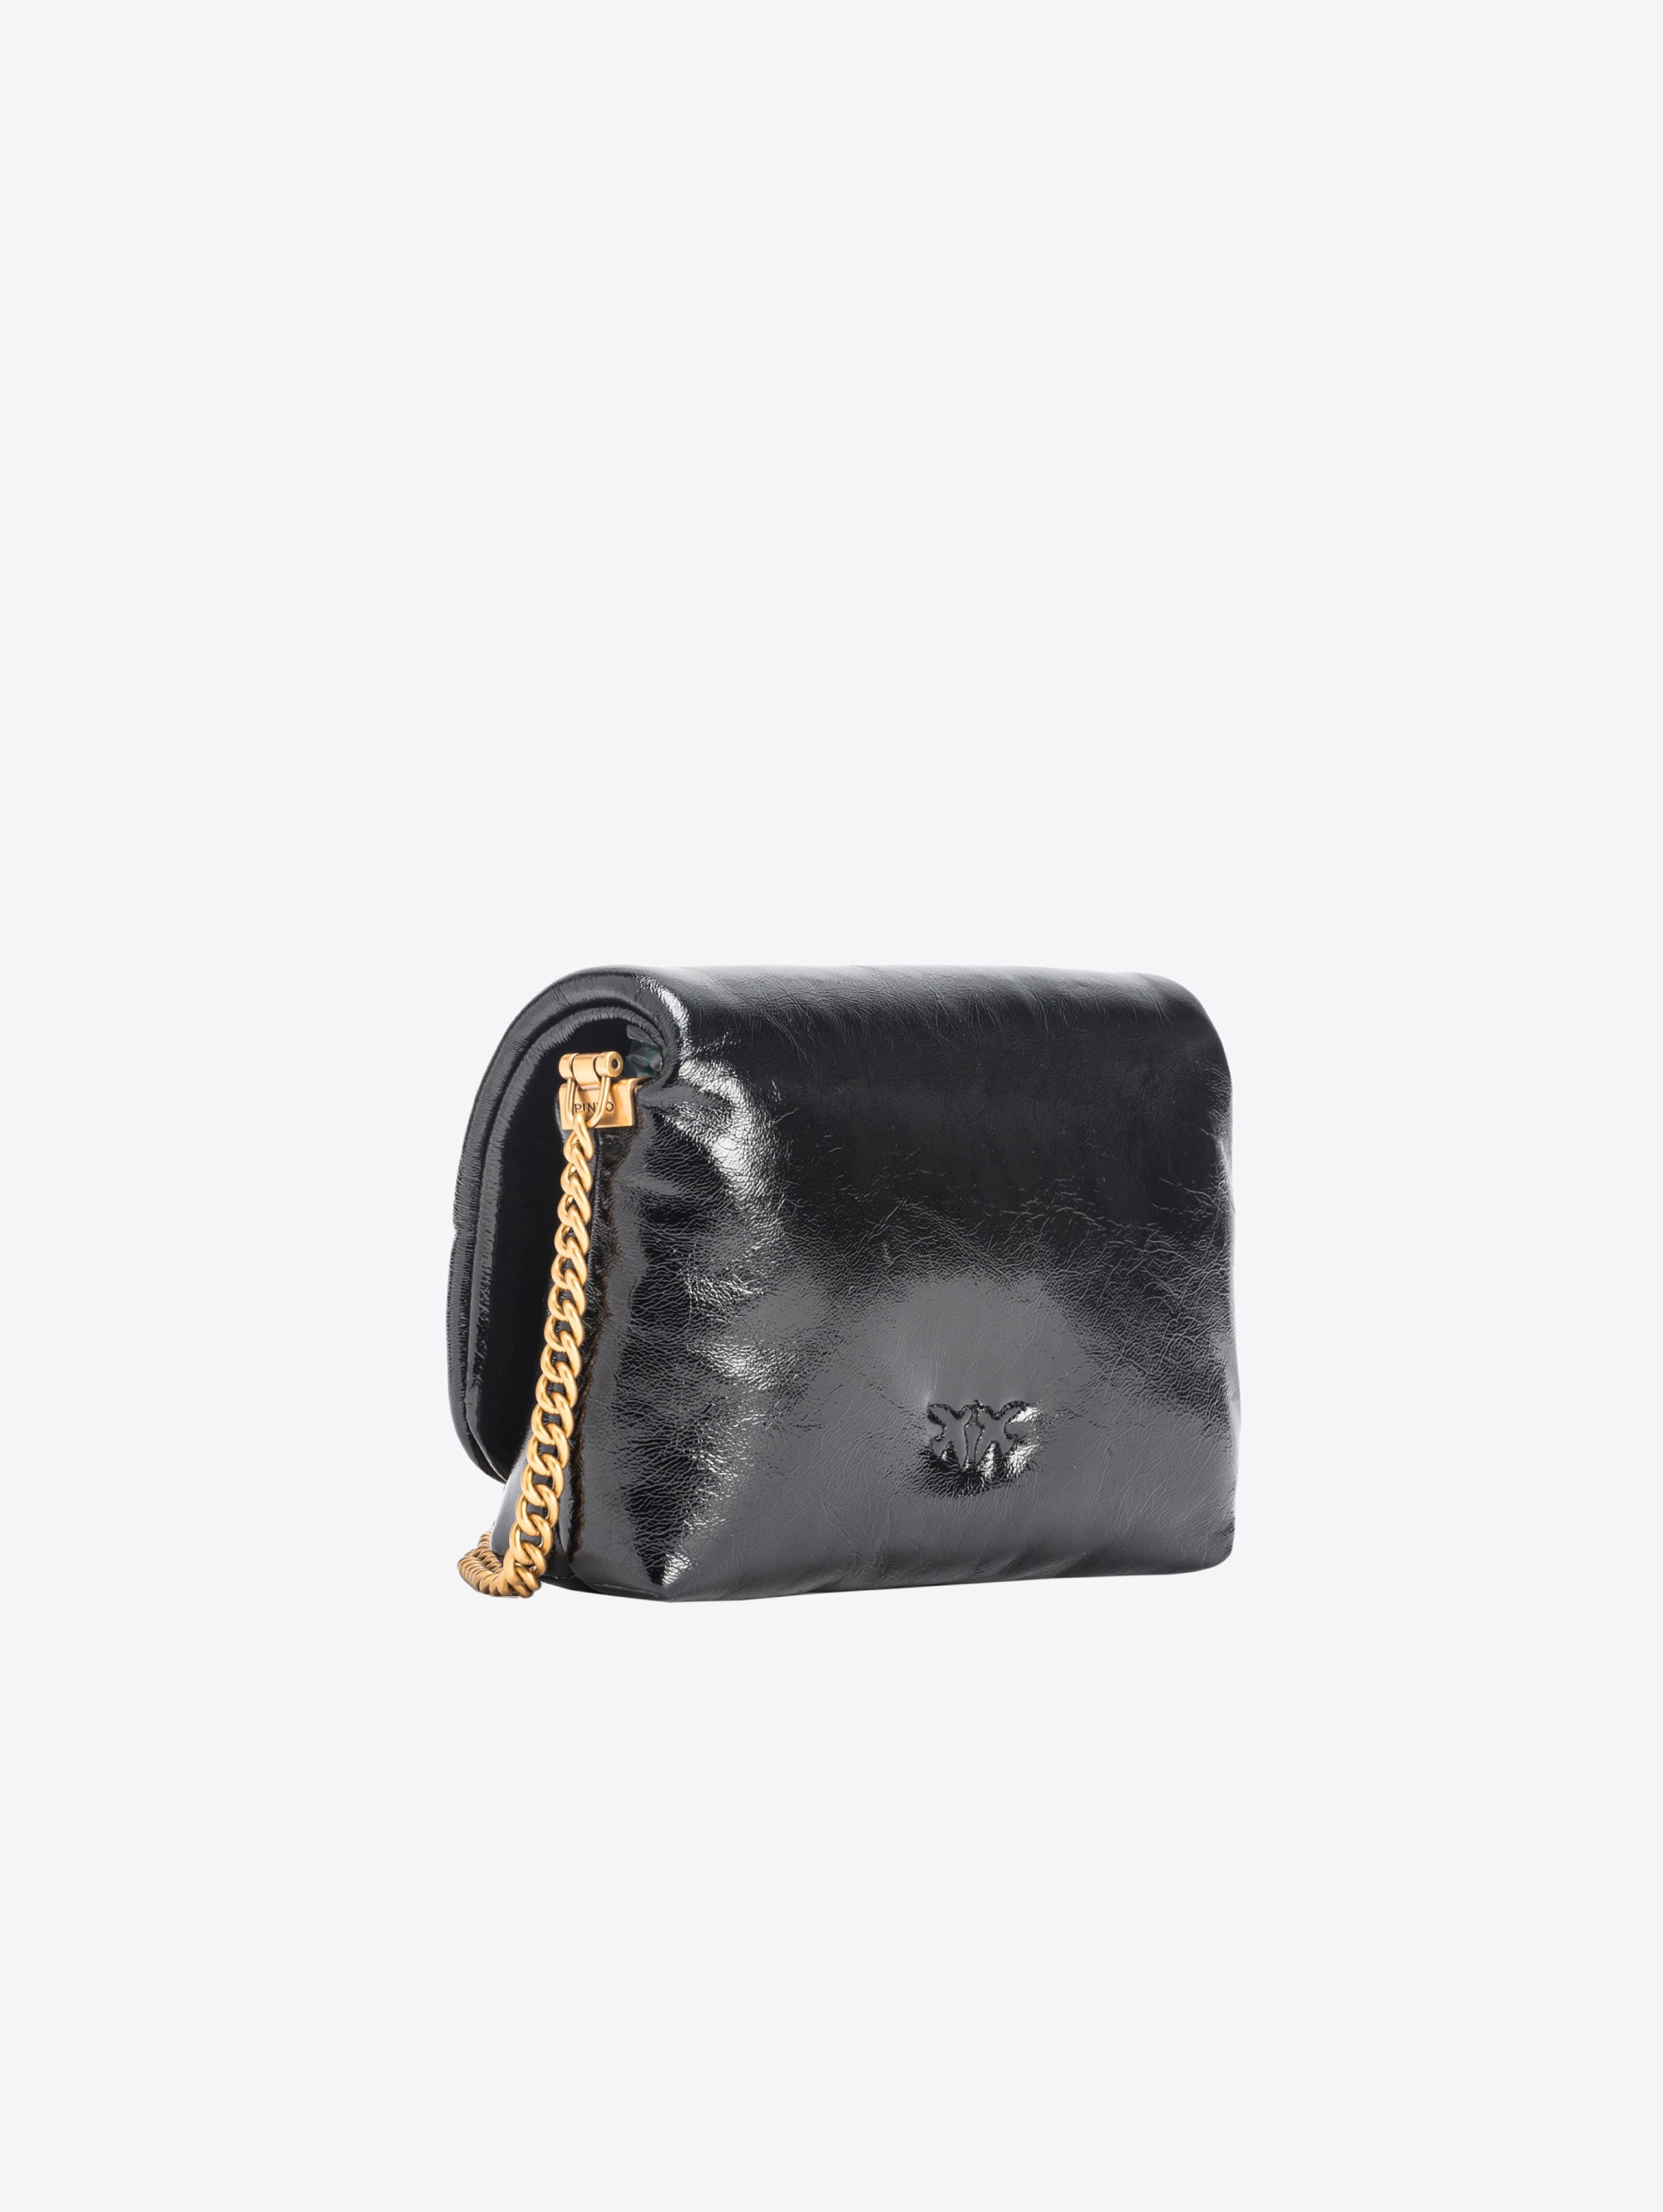 Puff Bag in Leather with Soft Naplack Effect Black